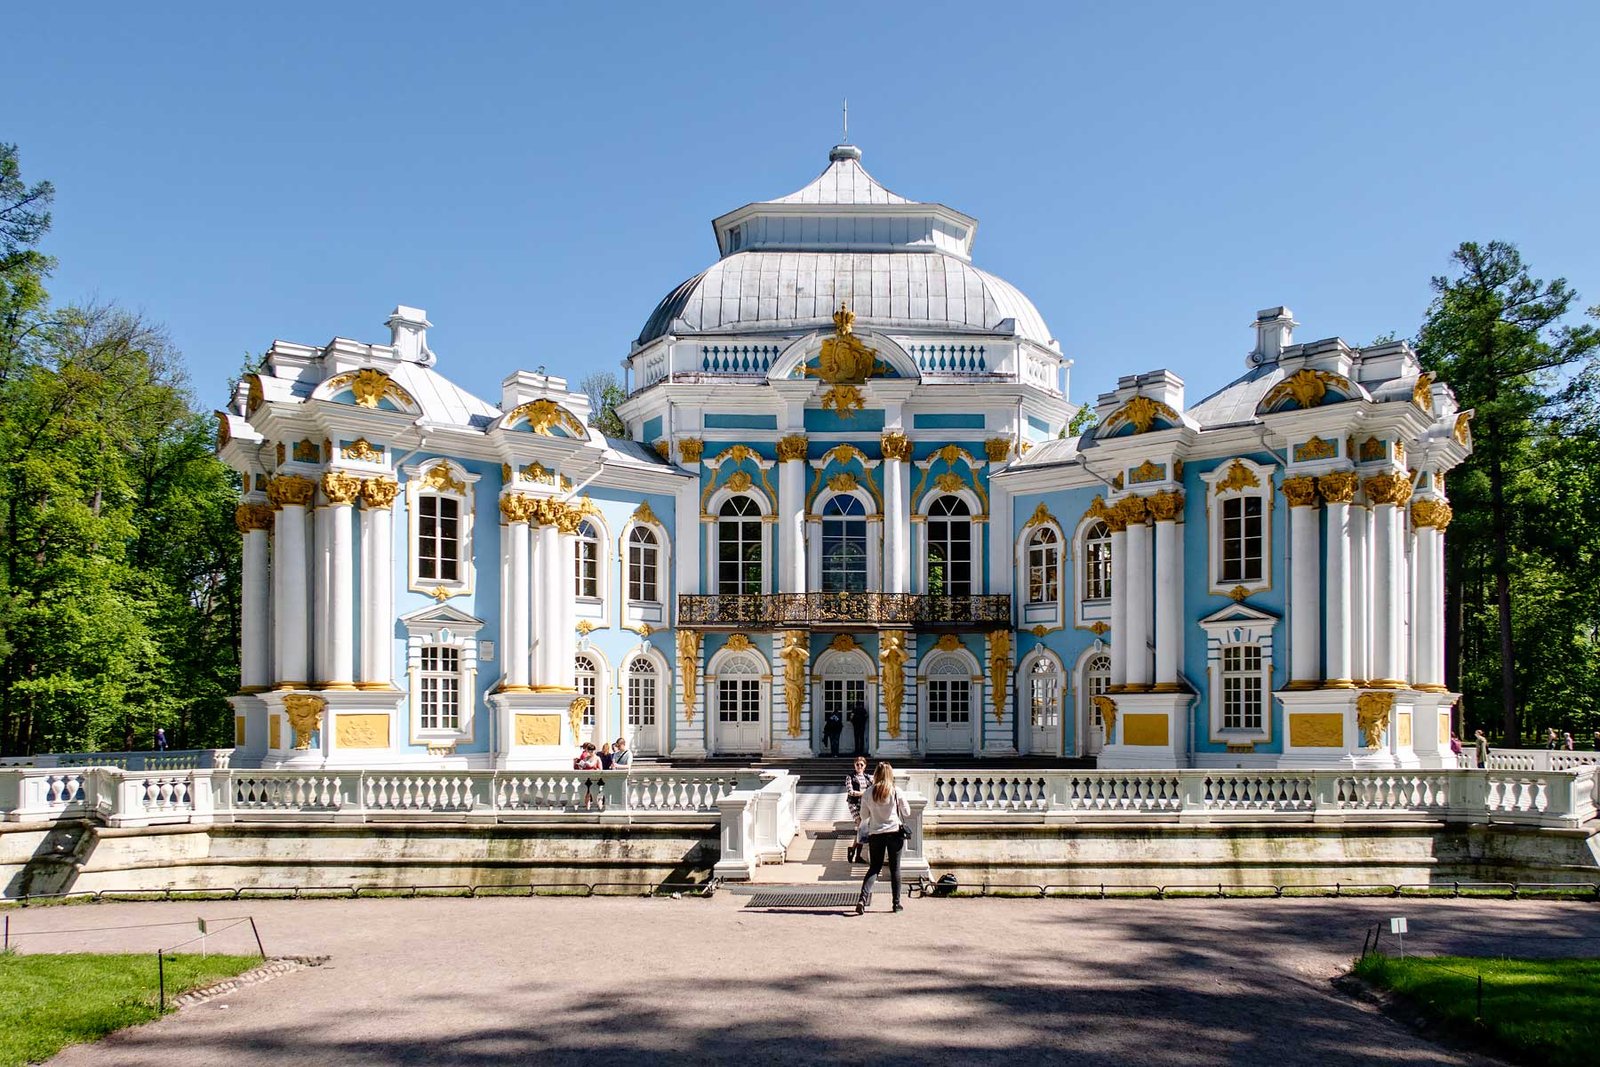 The Hermitage at Catherine Palace | St Petersburg, Russia - Things to do on your first visit